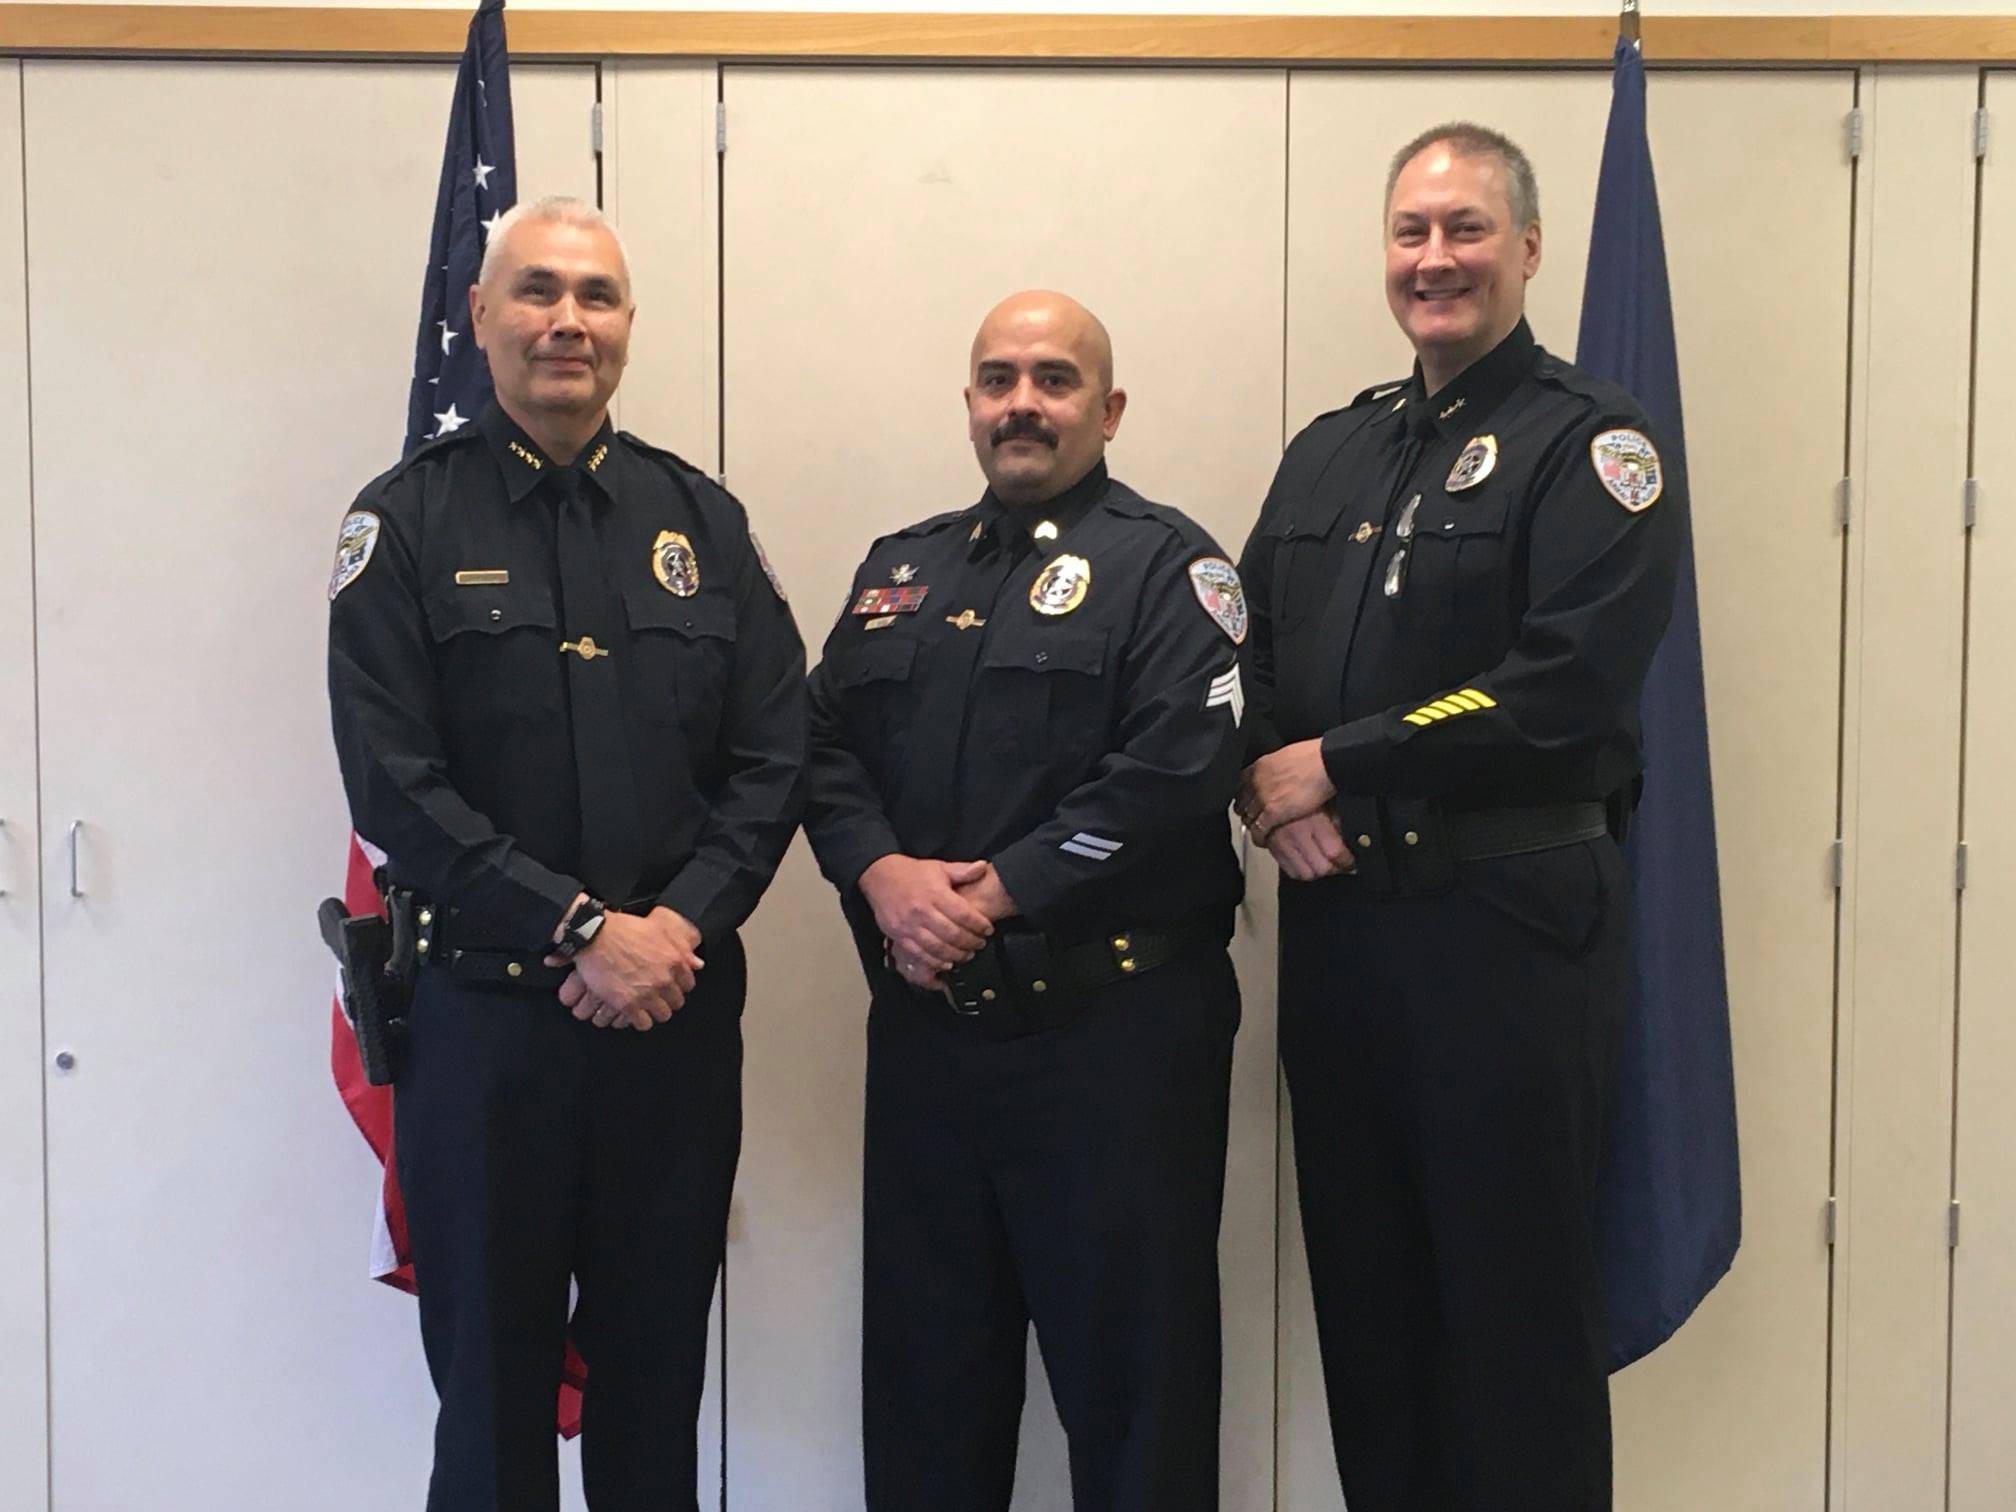 Juneau Police Department Chief Ed Mercer, left, and Deputy Chief David Campbell, right, pose with Sgt. Nick Garza, center, for Garza's promotion to sergeant on Oct. 14, 2020. (Courtesy photo / JPD)